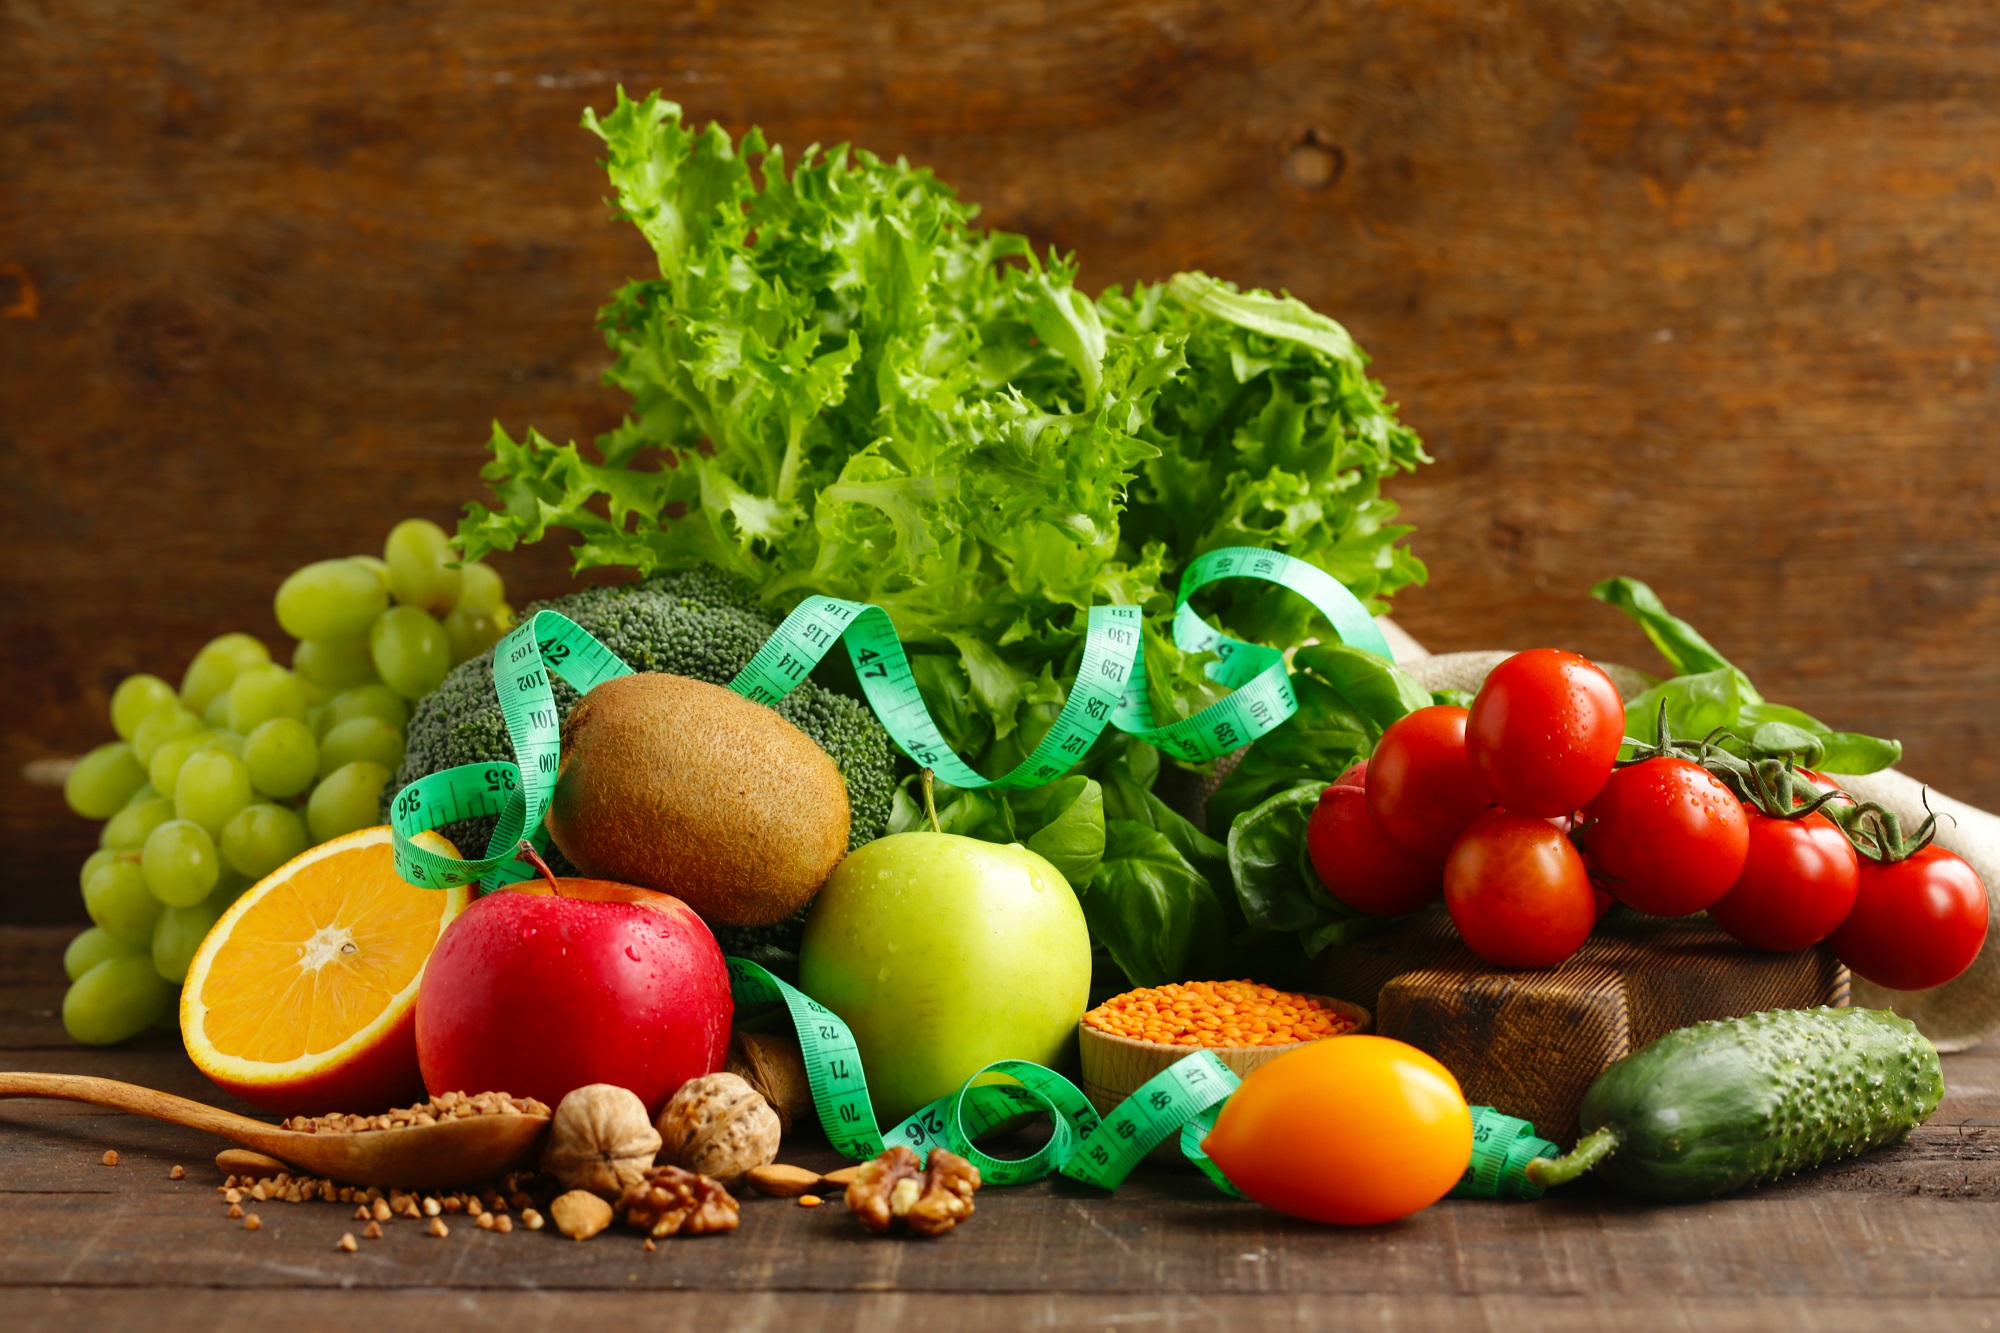 fresh vegetables and fruits for healthy eating